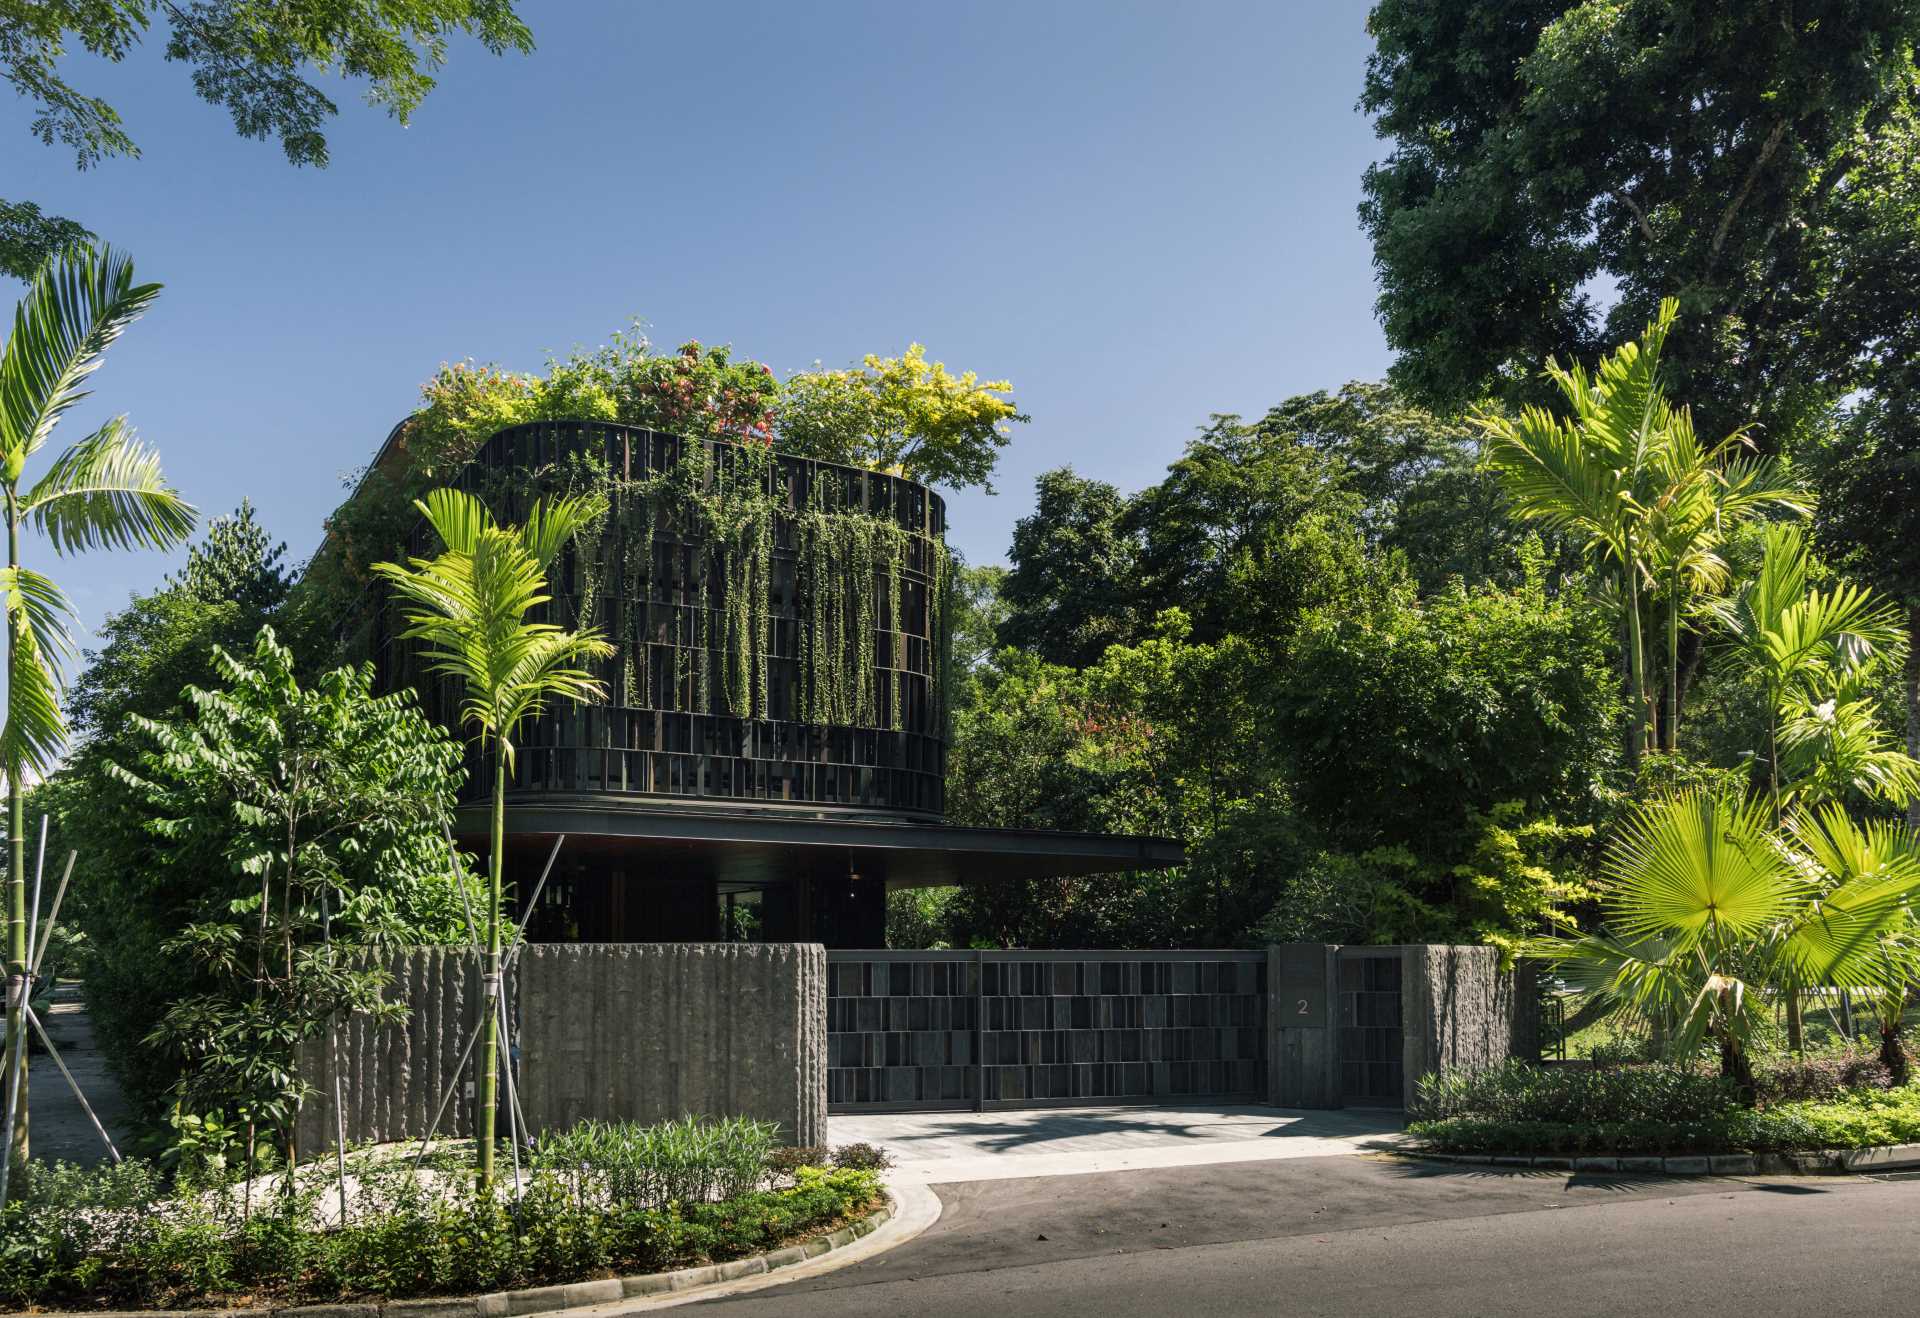 A modern house in Singapore that has plants and shade screens integrated into its design.